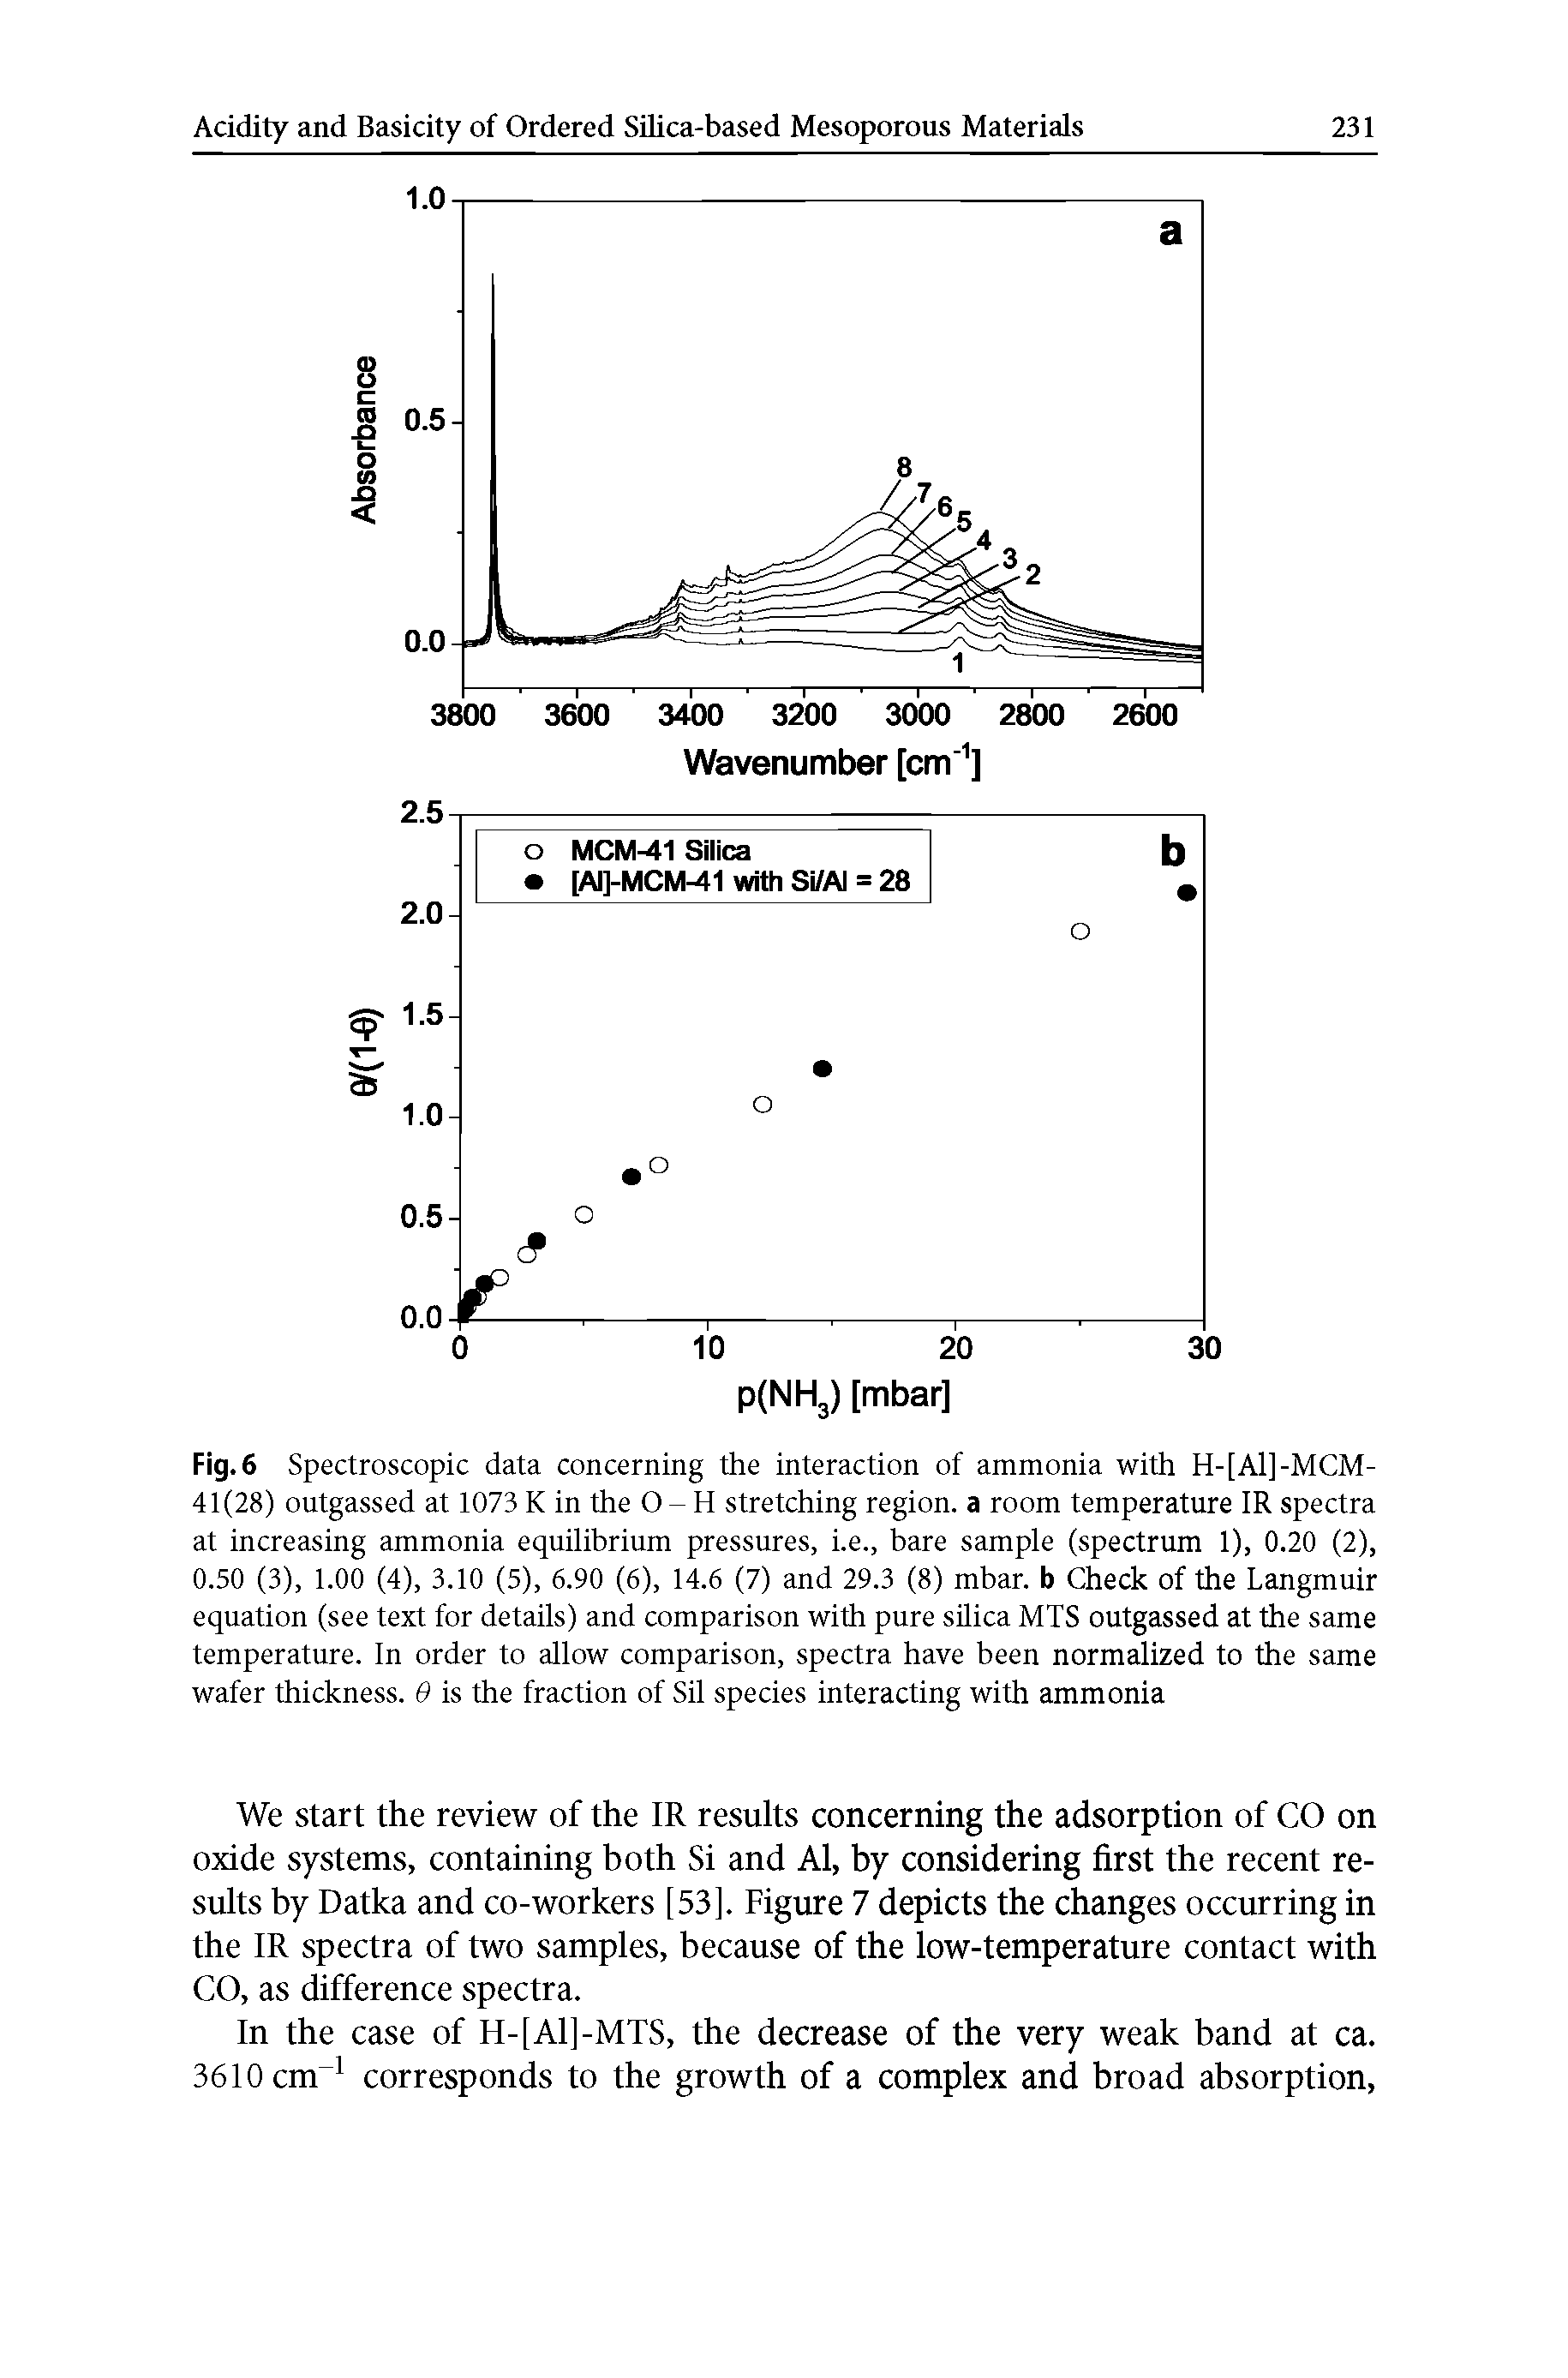 Fig.6 Spectroscopic data concerning the interaction of ammonia with H-[Al]-MCM-41(28) outgassed at 1073 K in the O - H stretching region, a room temperature IR spectra at increasing ammonia equilibrium pressures, i.e., bare sample (spectrum 1), 0.20 (2), 0.50 (3), 1.00 (4), 3.10 (5), 6.90 (6), 14.6 (7) and 29.3 (8) mbar. b Check of the Langmuir equation (see text for details) and comparison with pure sUica MTS outgassed at the same temperature. In order to allow comparison, spectra have been normalized to the same wafer thickness. 0 is the fraction of Sil species interacting with ammonia...